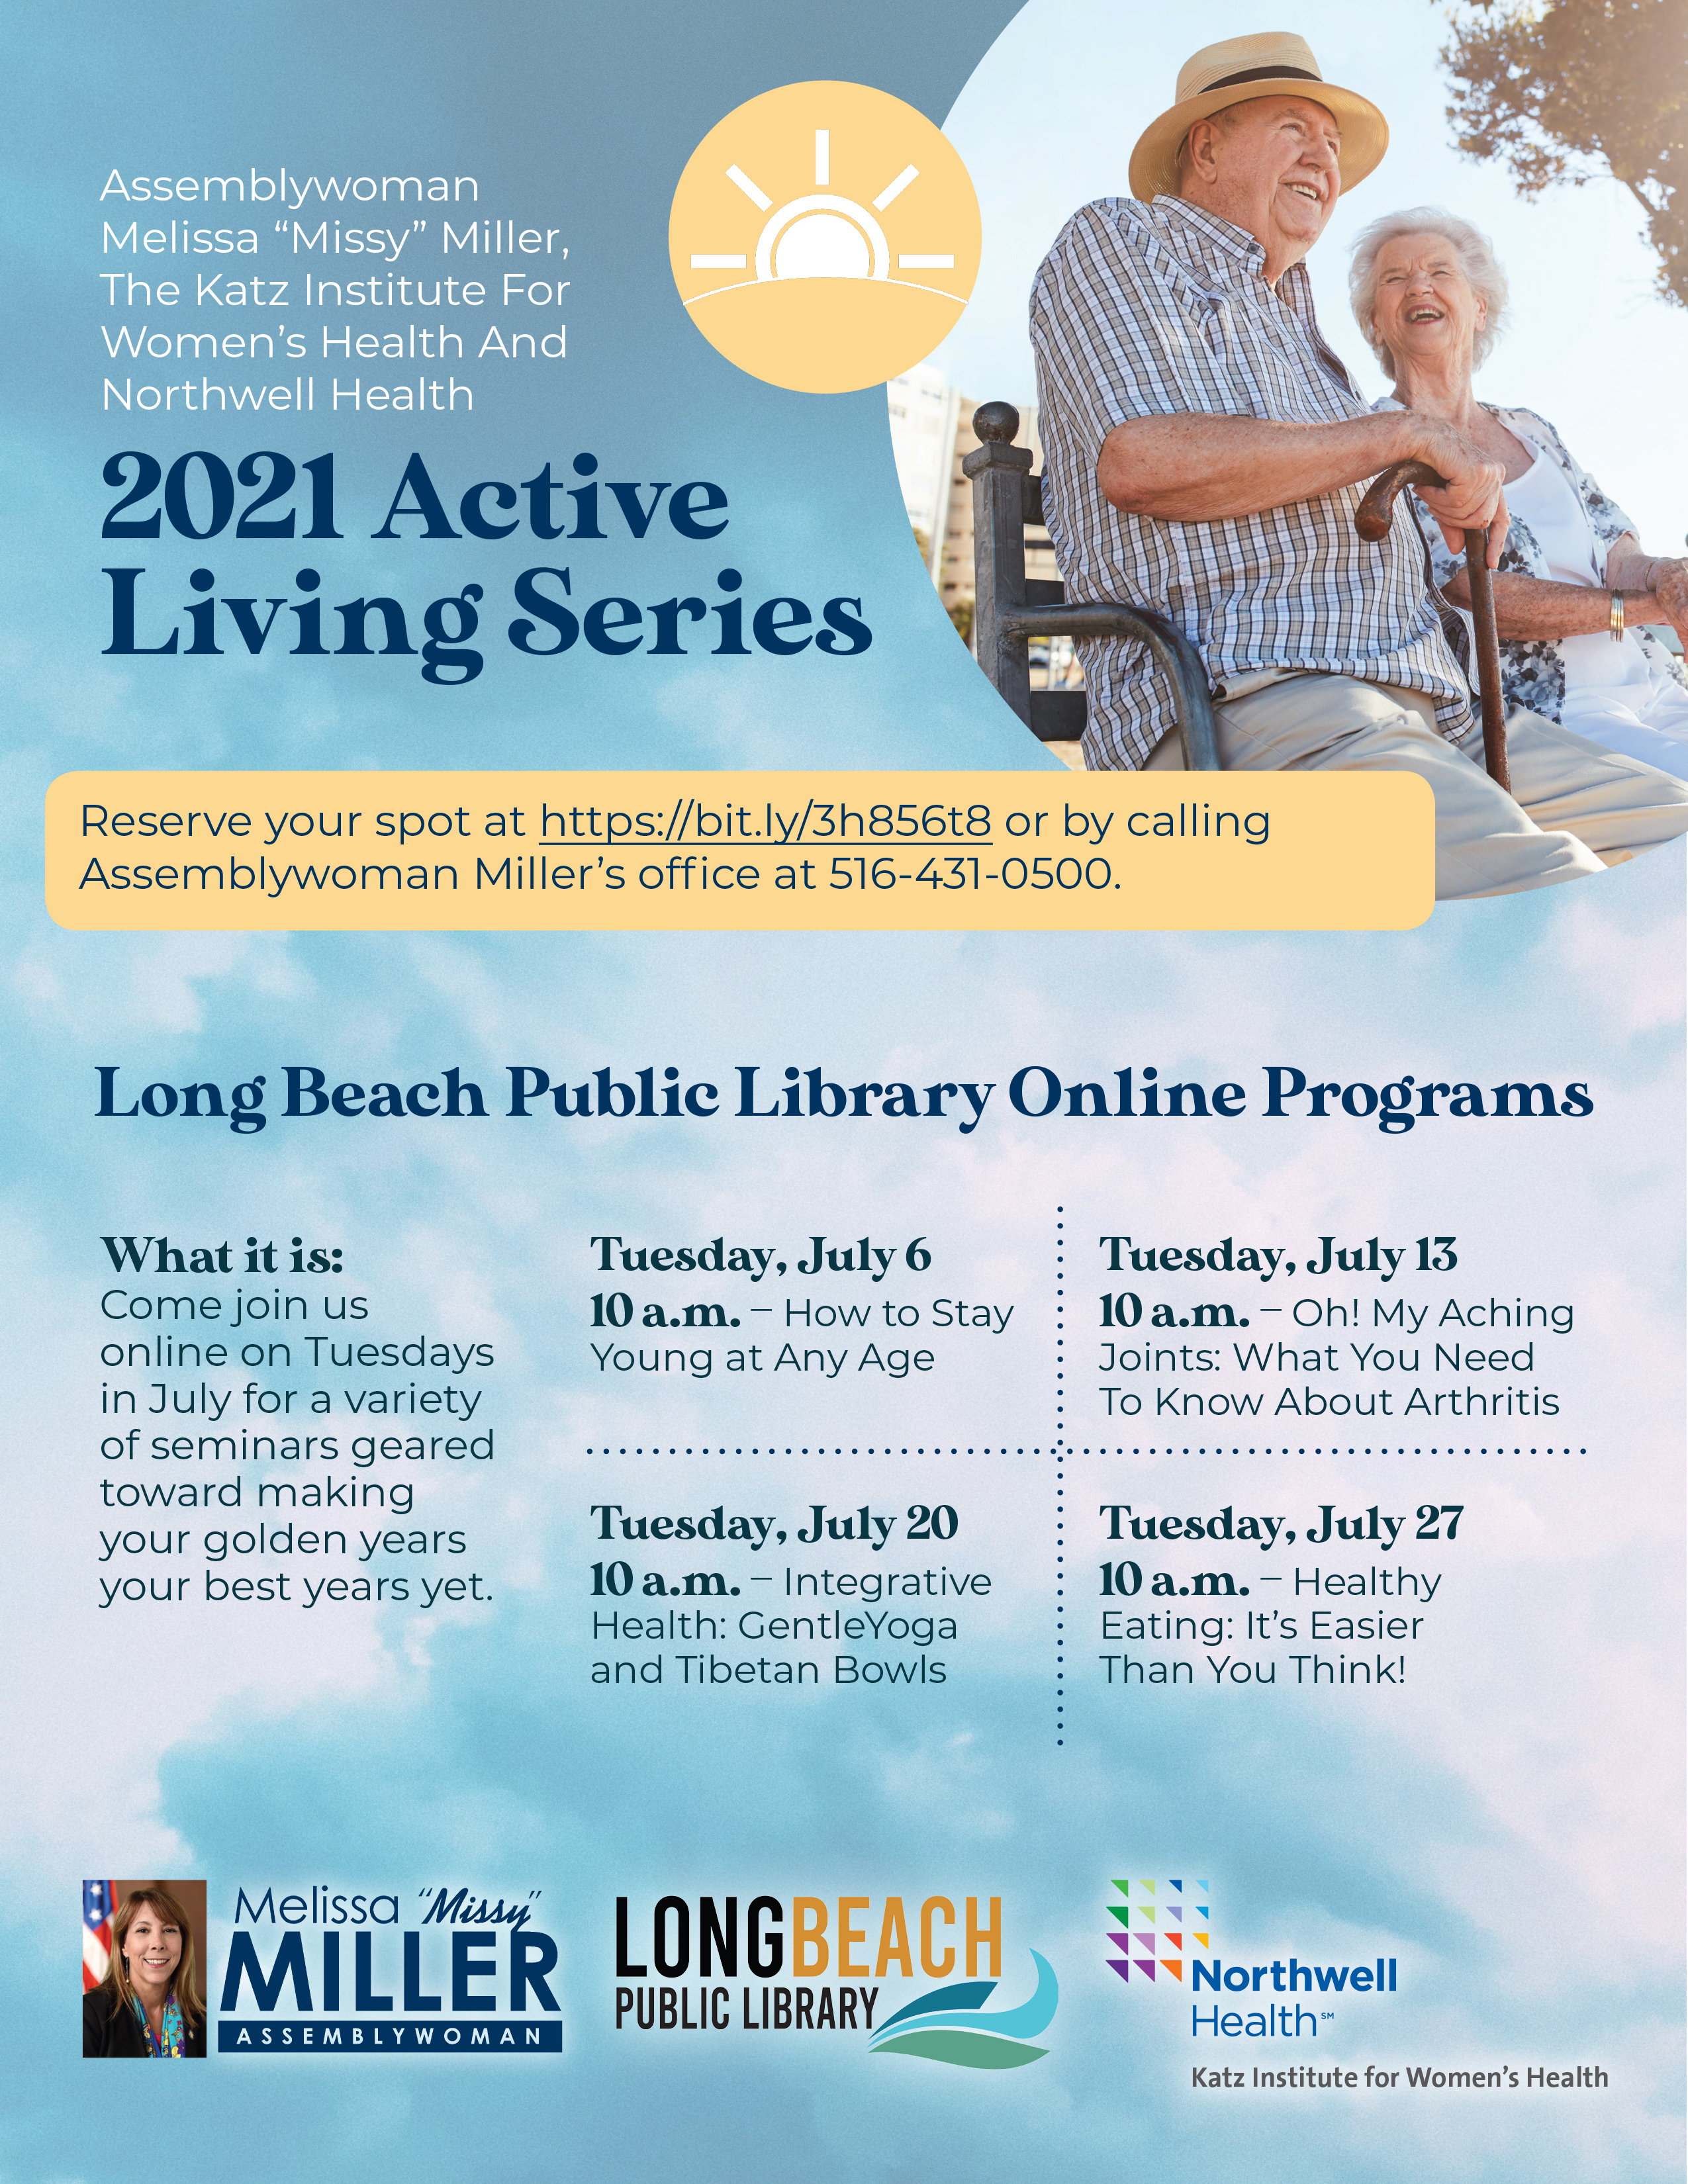 2021 Active Living Series with Long Beach Public Library and Assemblywoman Miller